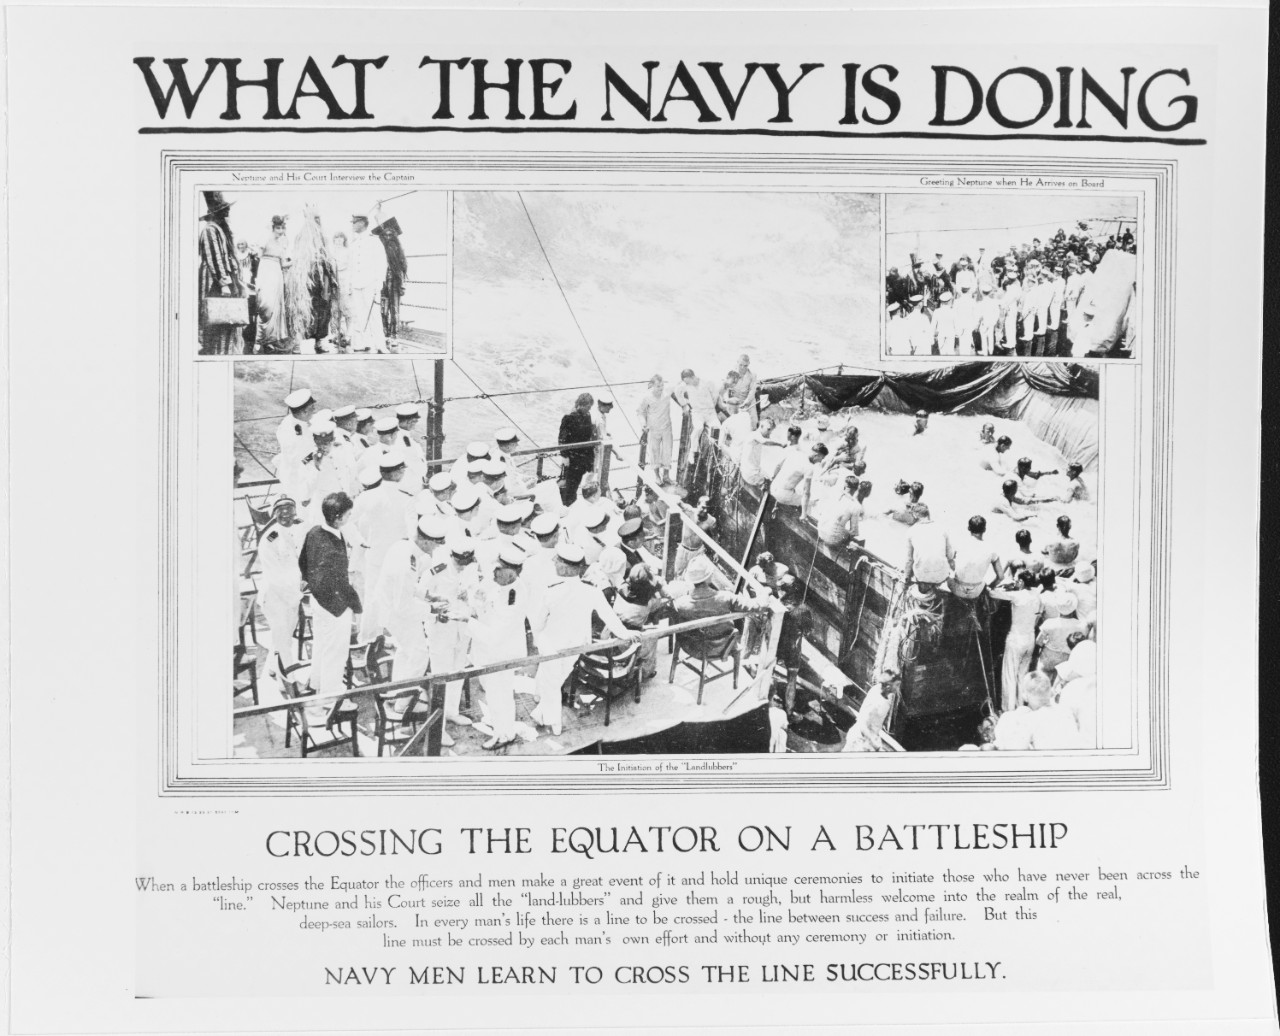 Recruiting Poster: What the Navy is Doing: Crossing the Equator in a Battleship